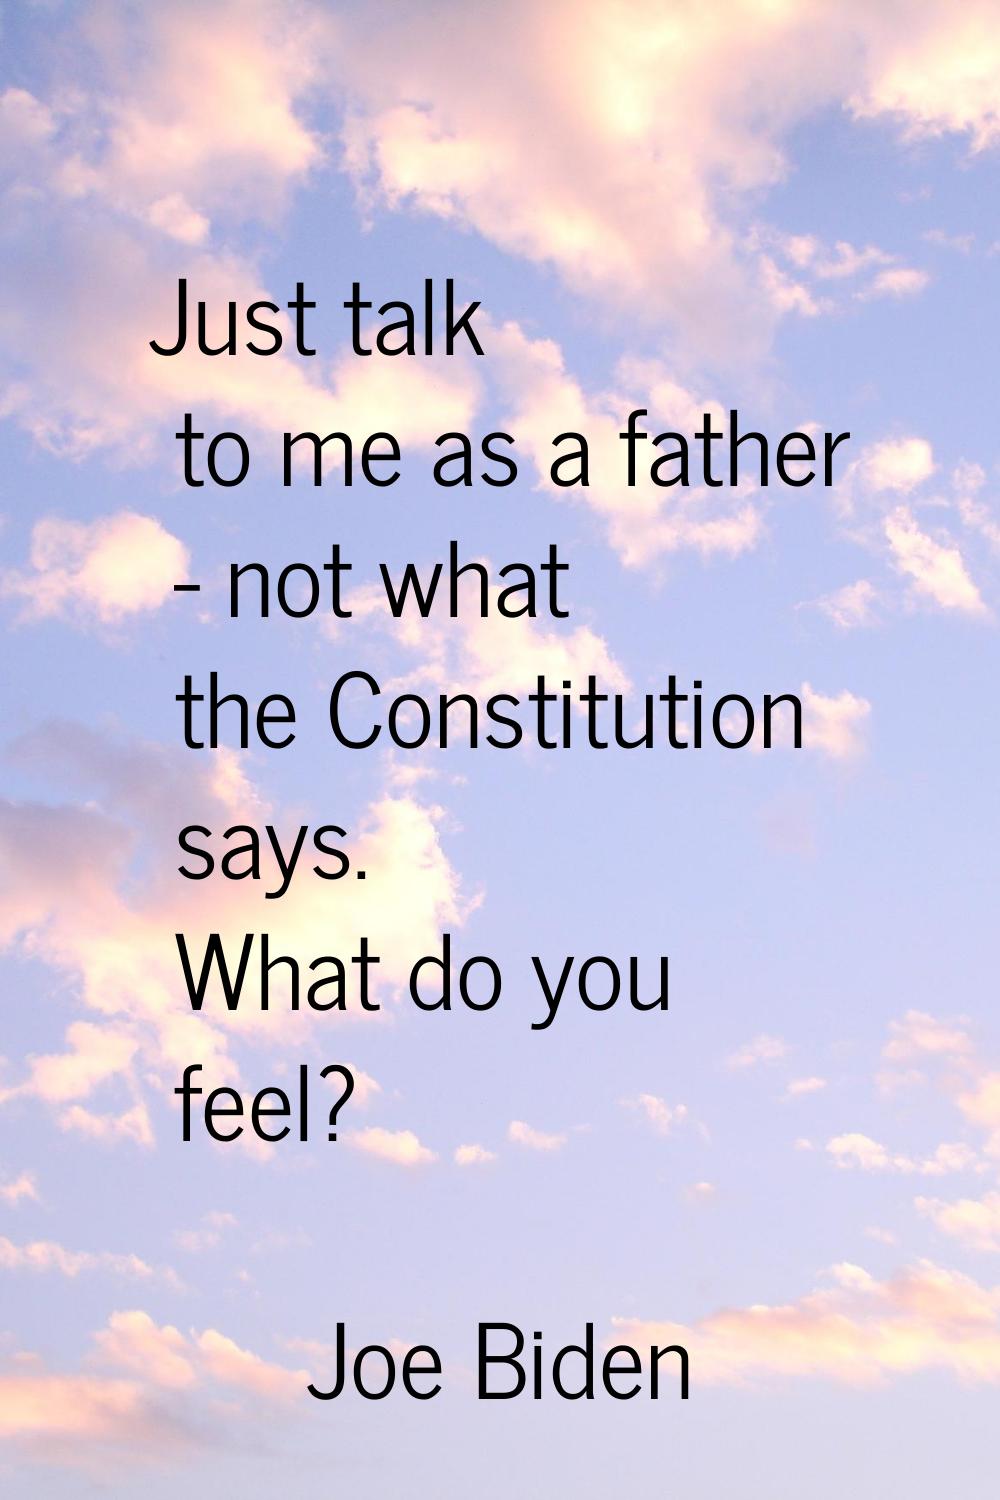 Just talk to me as a father - not what the Constitution says. What do you feel?